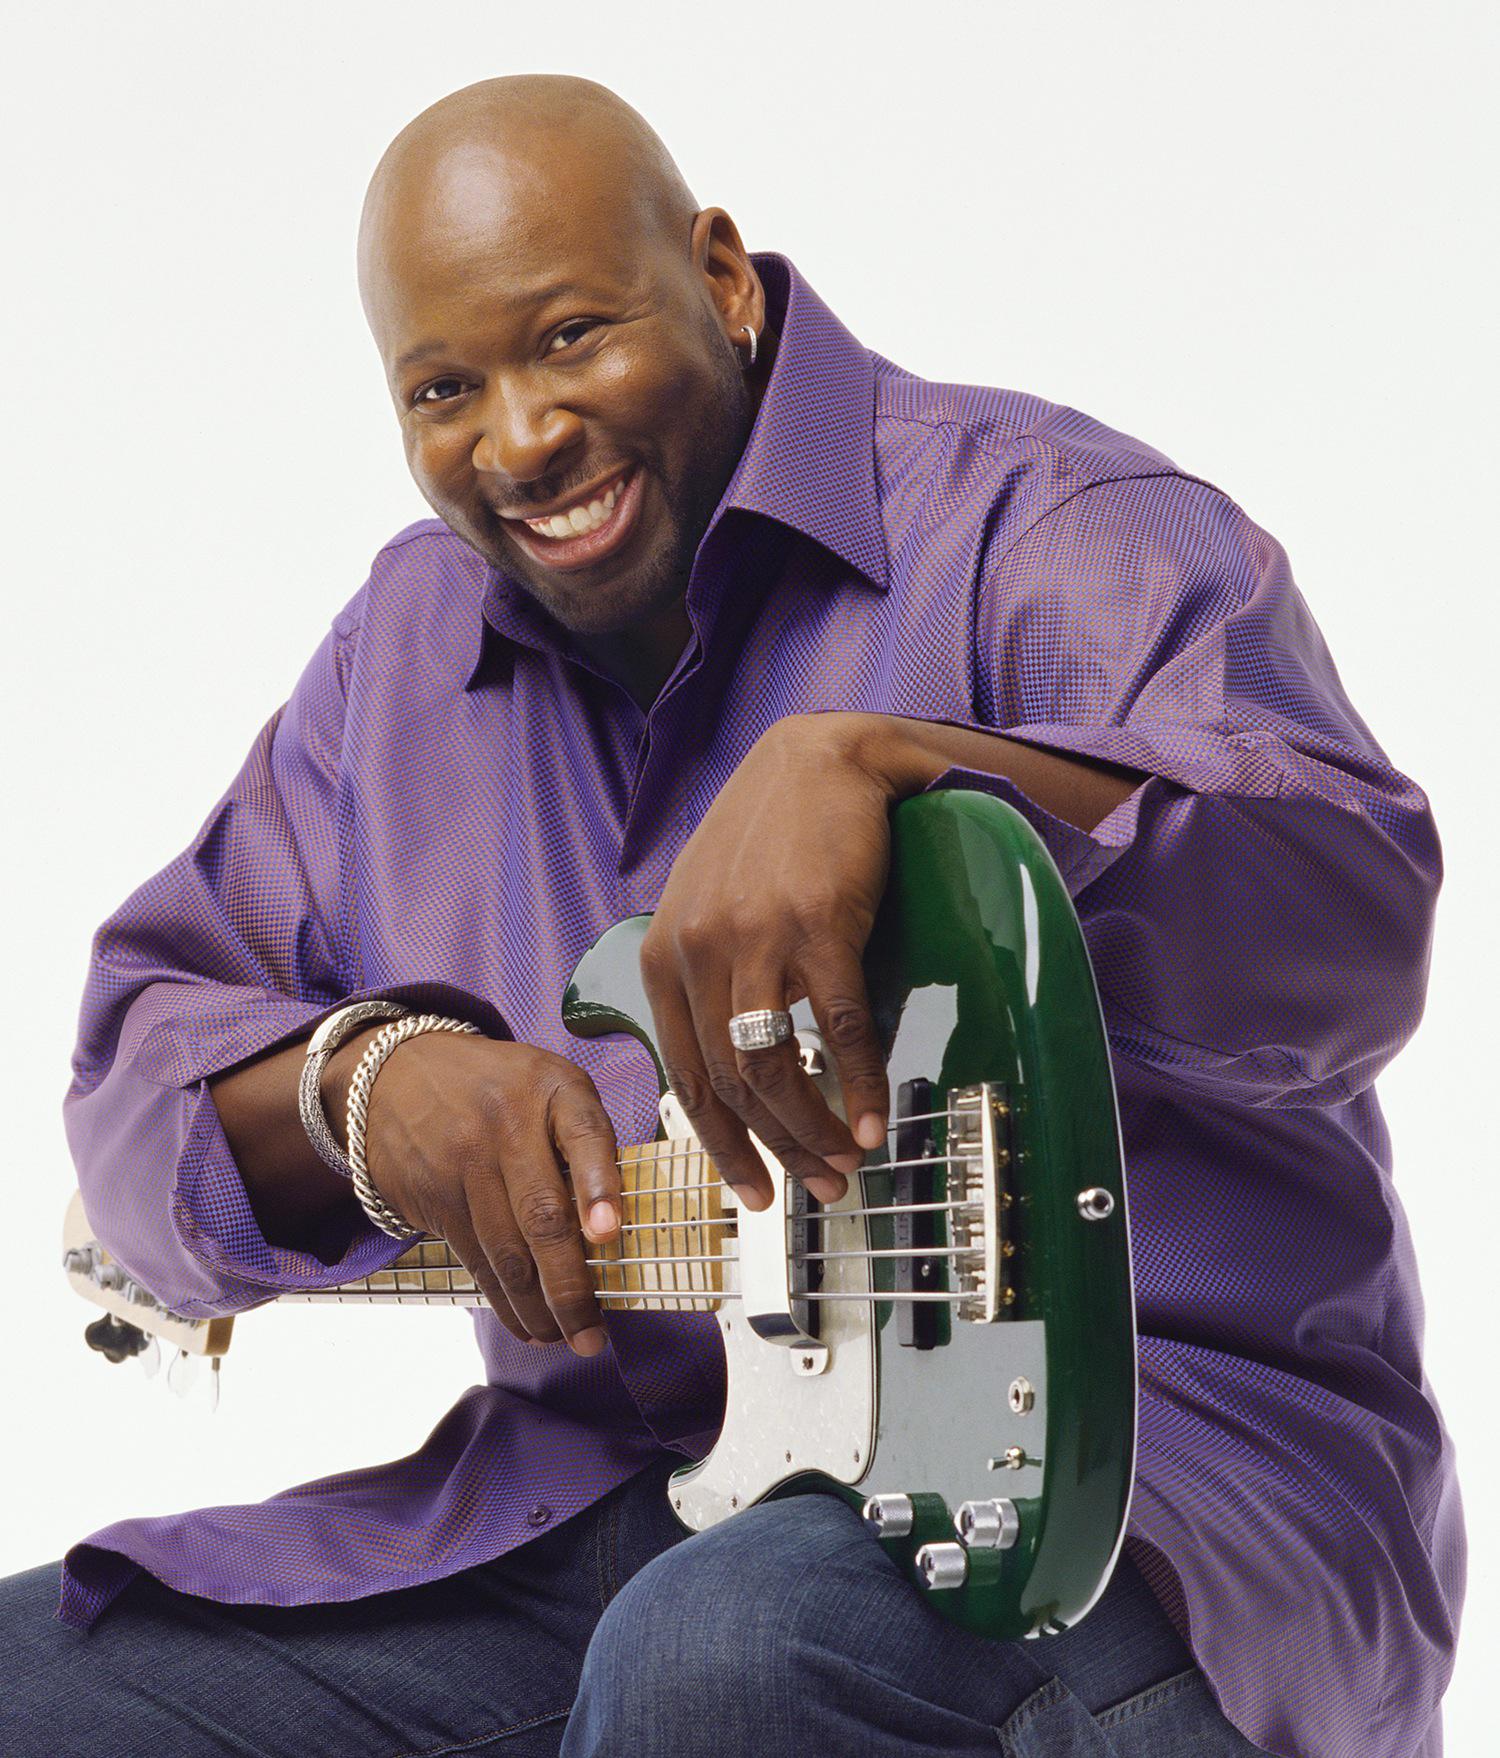 Happy birthday to the late Wayman Tisdale, born this day in 1964!  